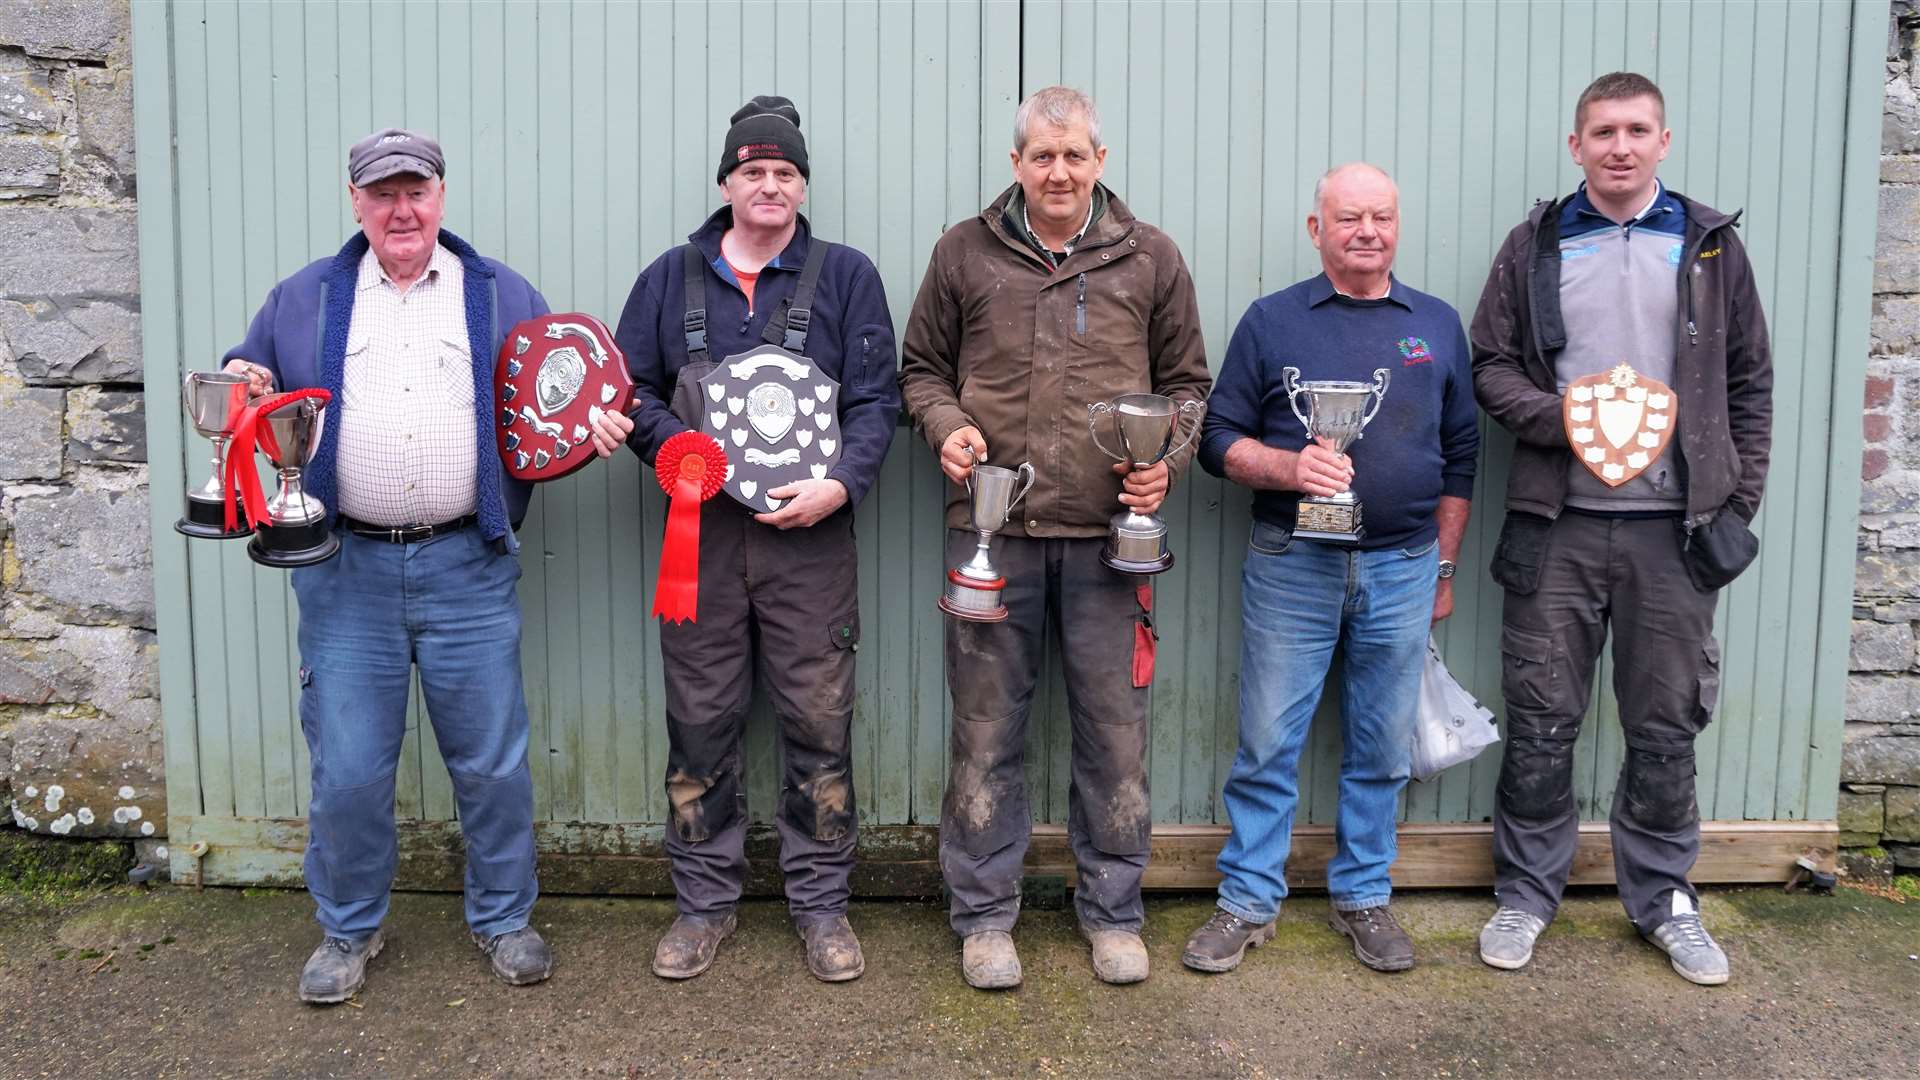 The ploughing match winners, from left, Gerald Macleod, Alan Campbell, Michael Mackay (overall winner), John Matheson and Stevie Blackwood. Picture: DGS